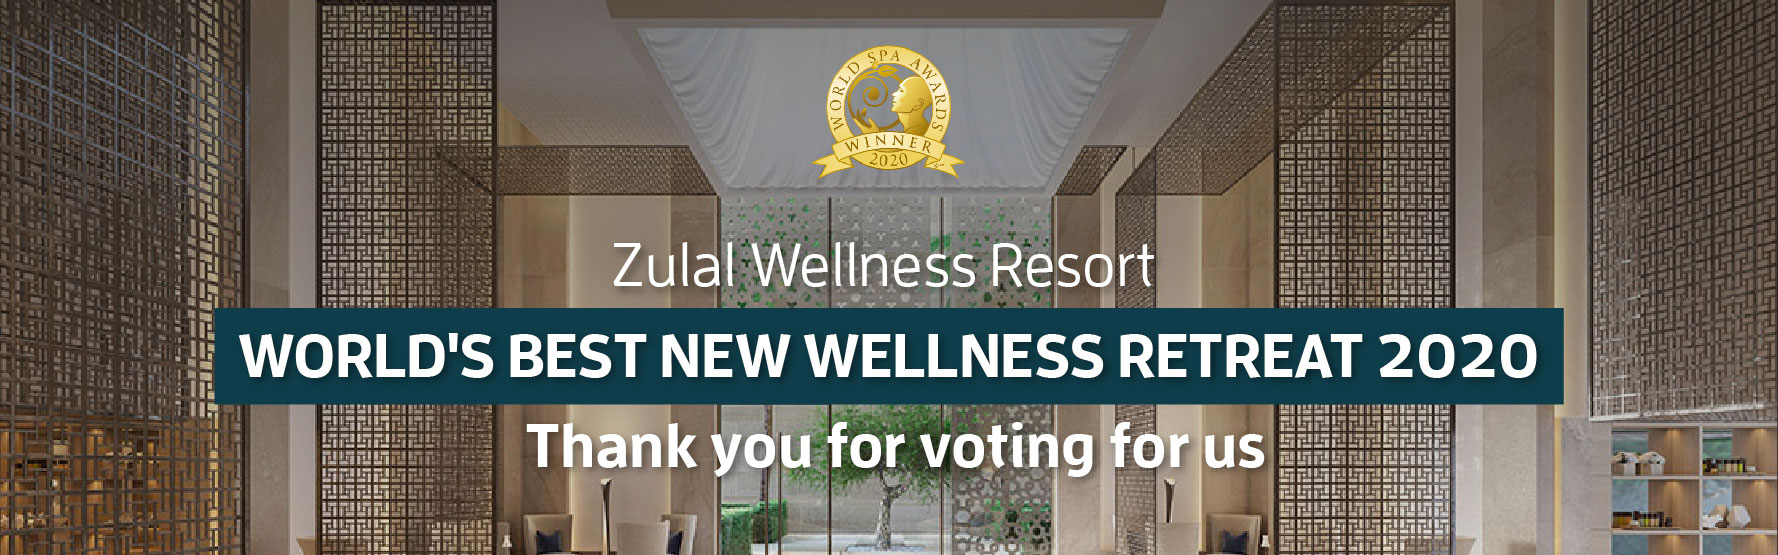 Zulal Wellness Resort Recognized as “World’s Best New Wellness Retreat” for 2020 by World Spa Awards